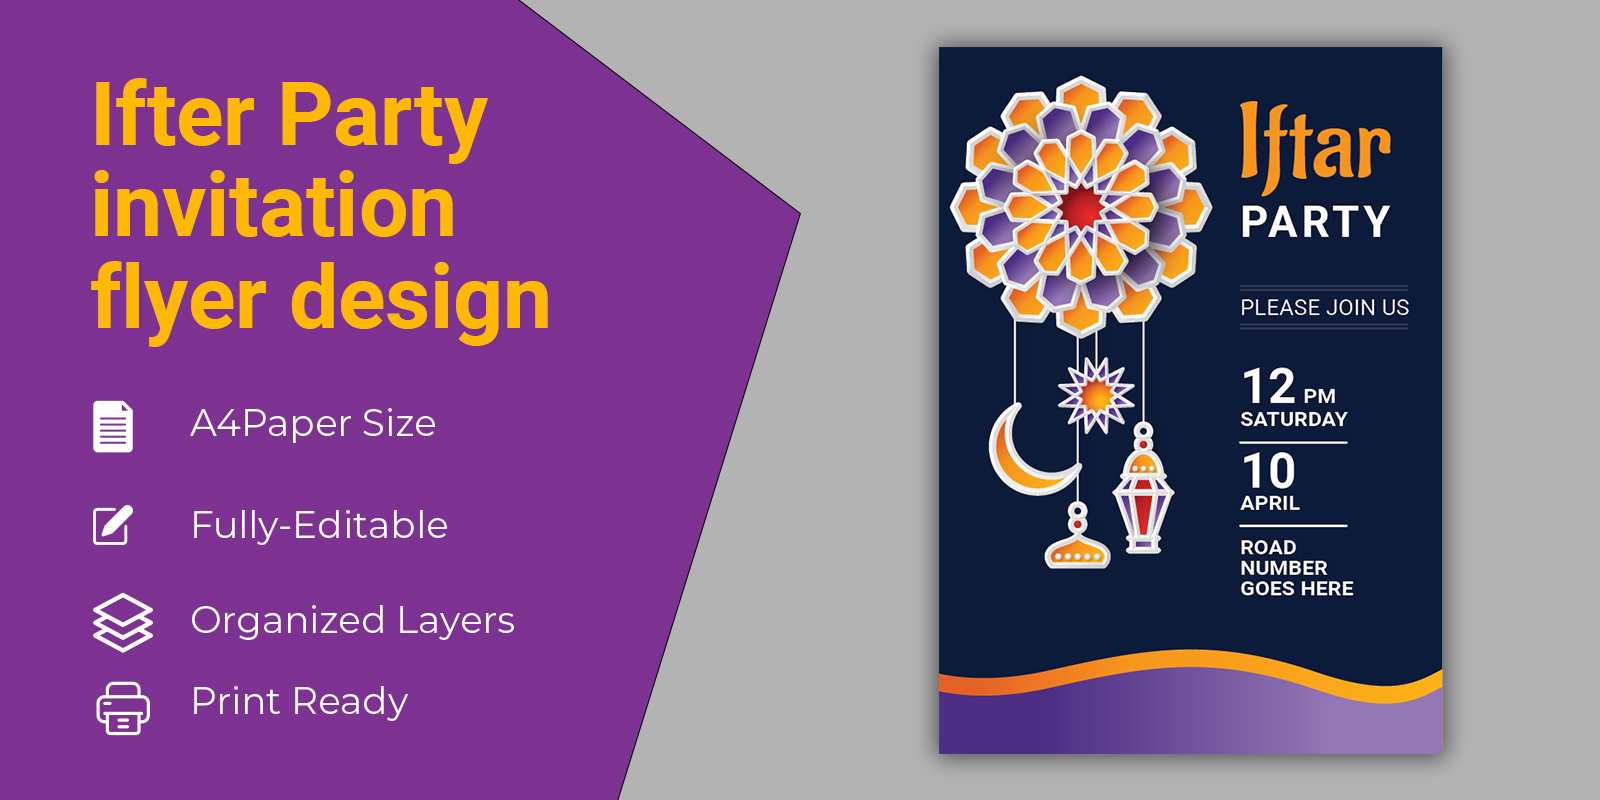 Ifter Party and Seminar Invitation Poster - Corporate Identity Template